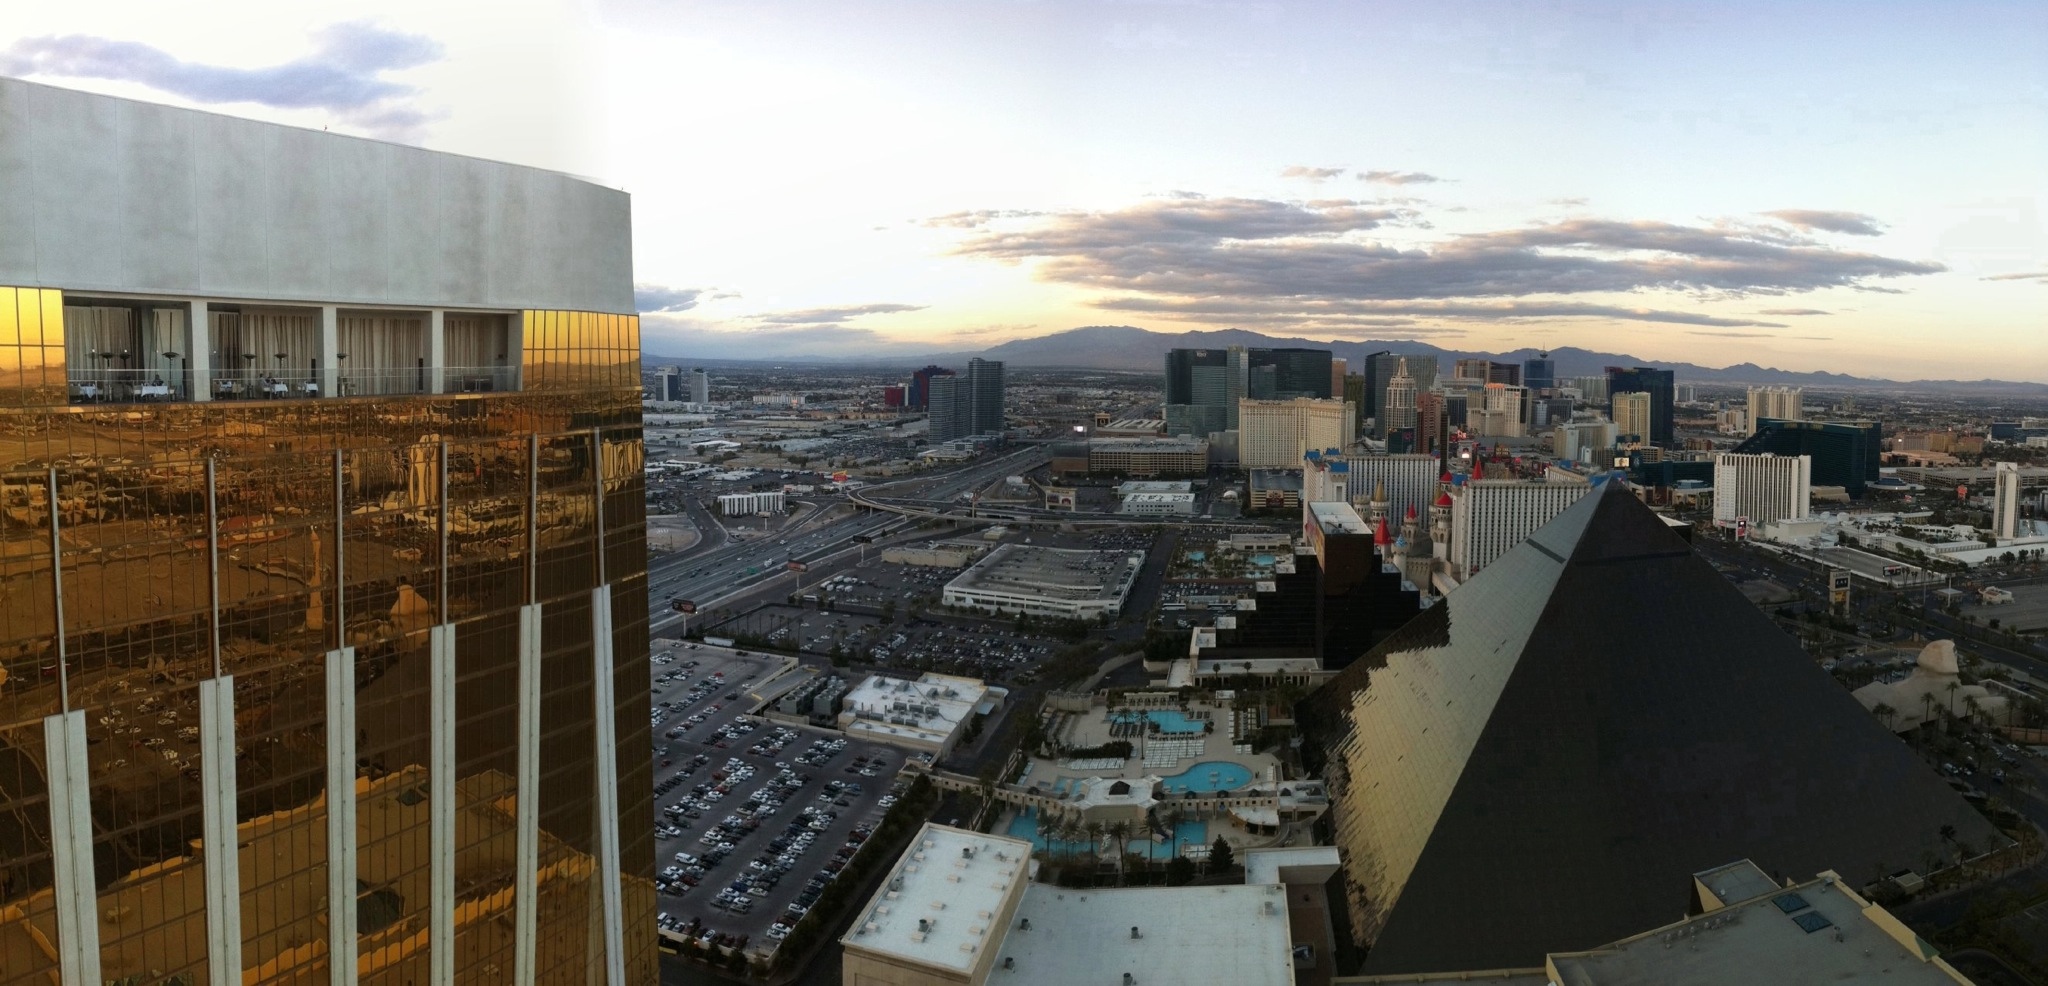 Day 202 – Sunset over the strip